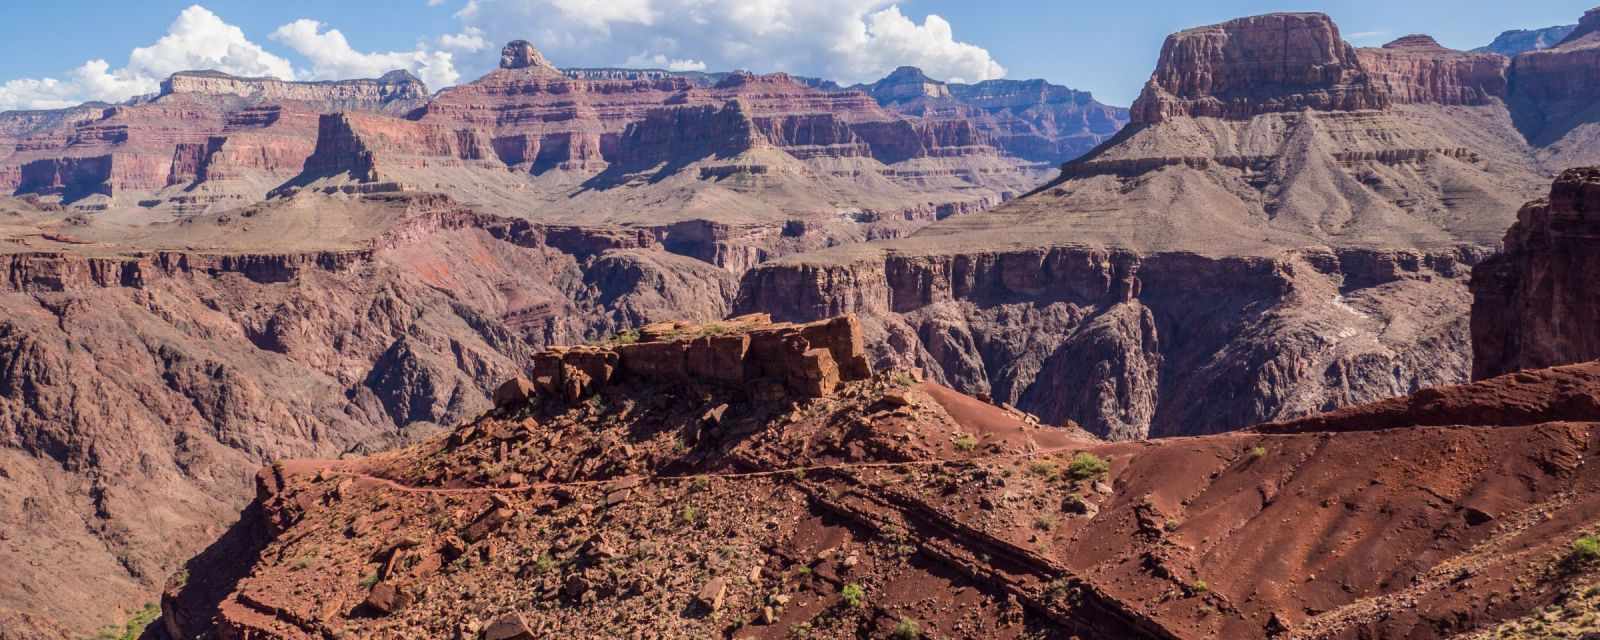 The South Kaibab Trail after Skeleton Point